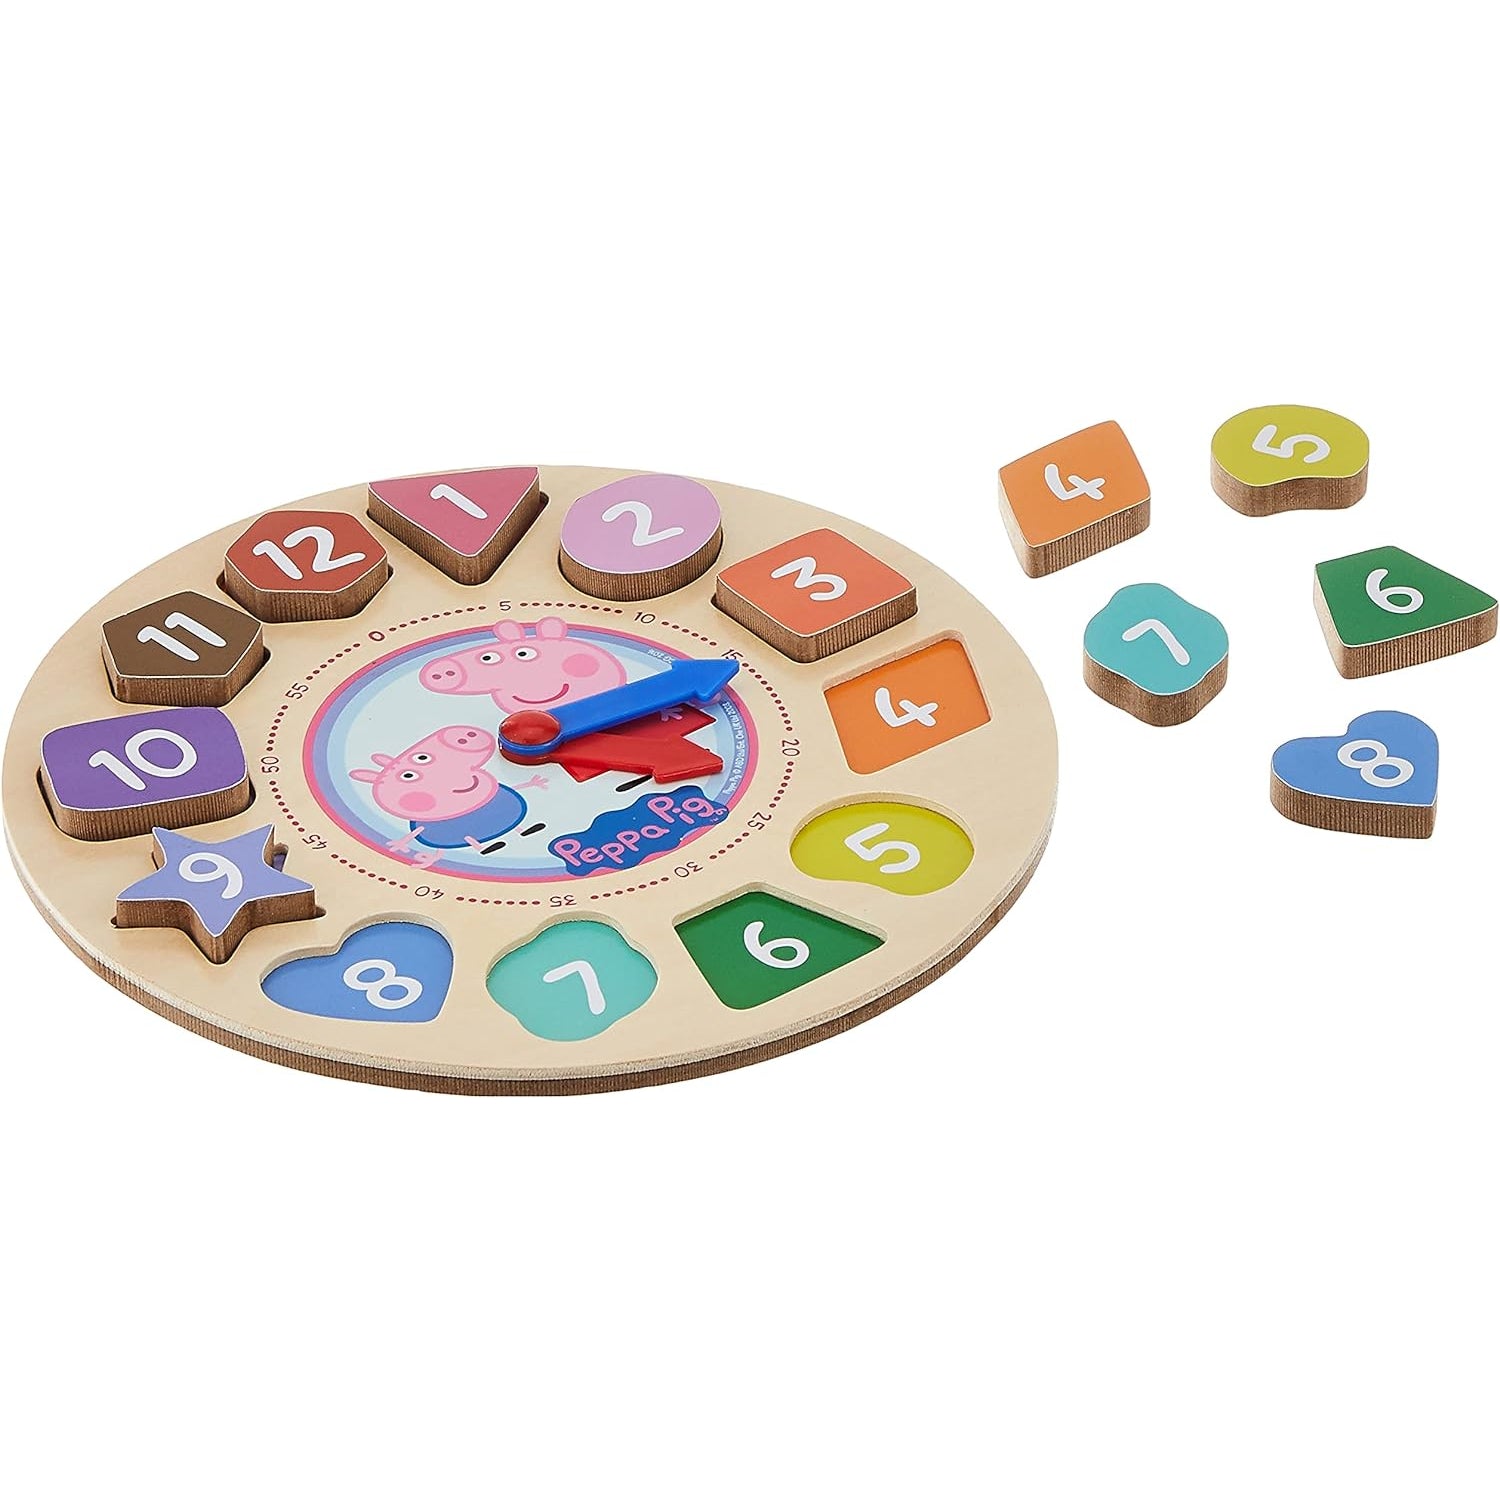 Peppa Pig Shape Sorter Clock Puzzle, 14 Pieces (12 Piece Numbers + Clock + Stand )